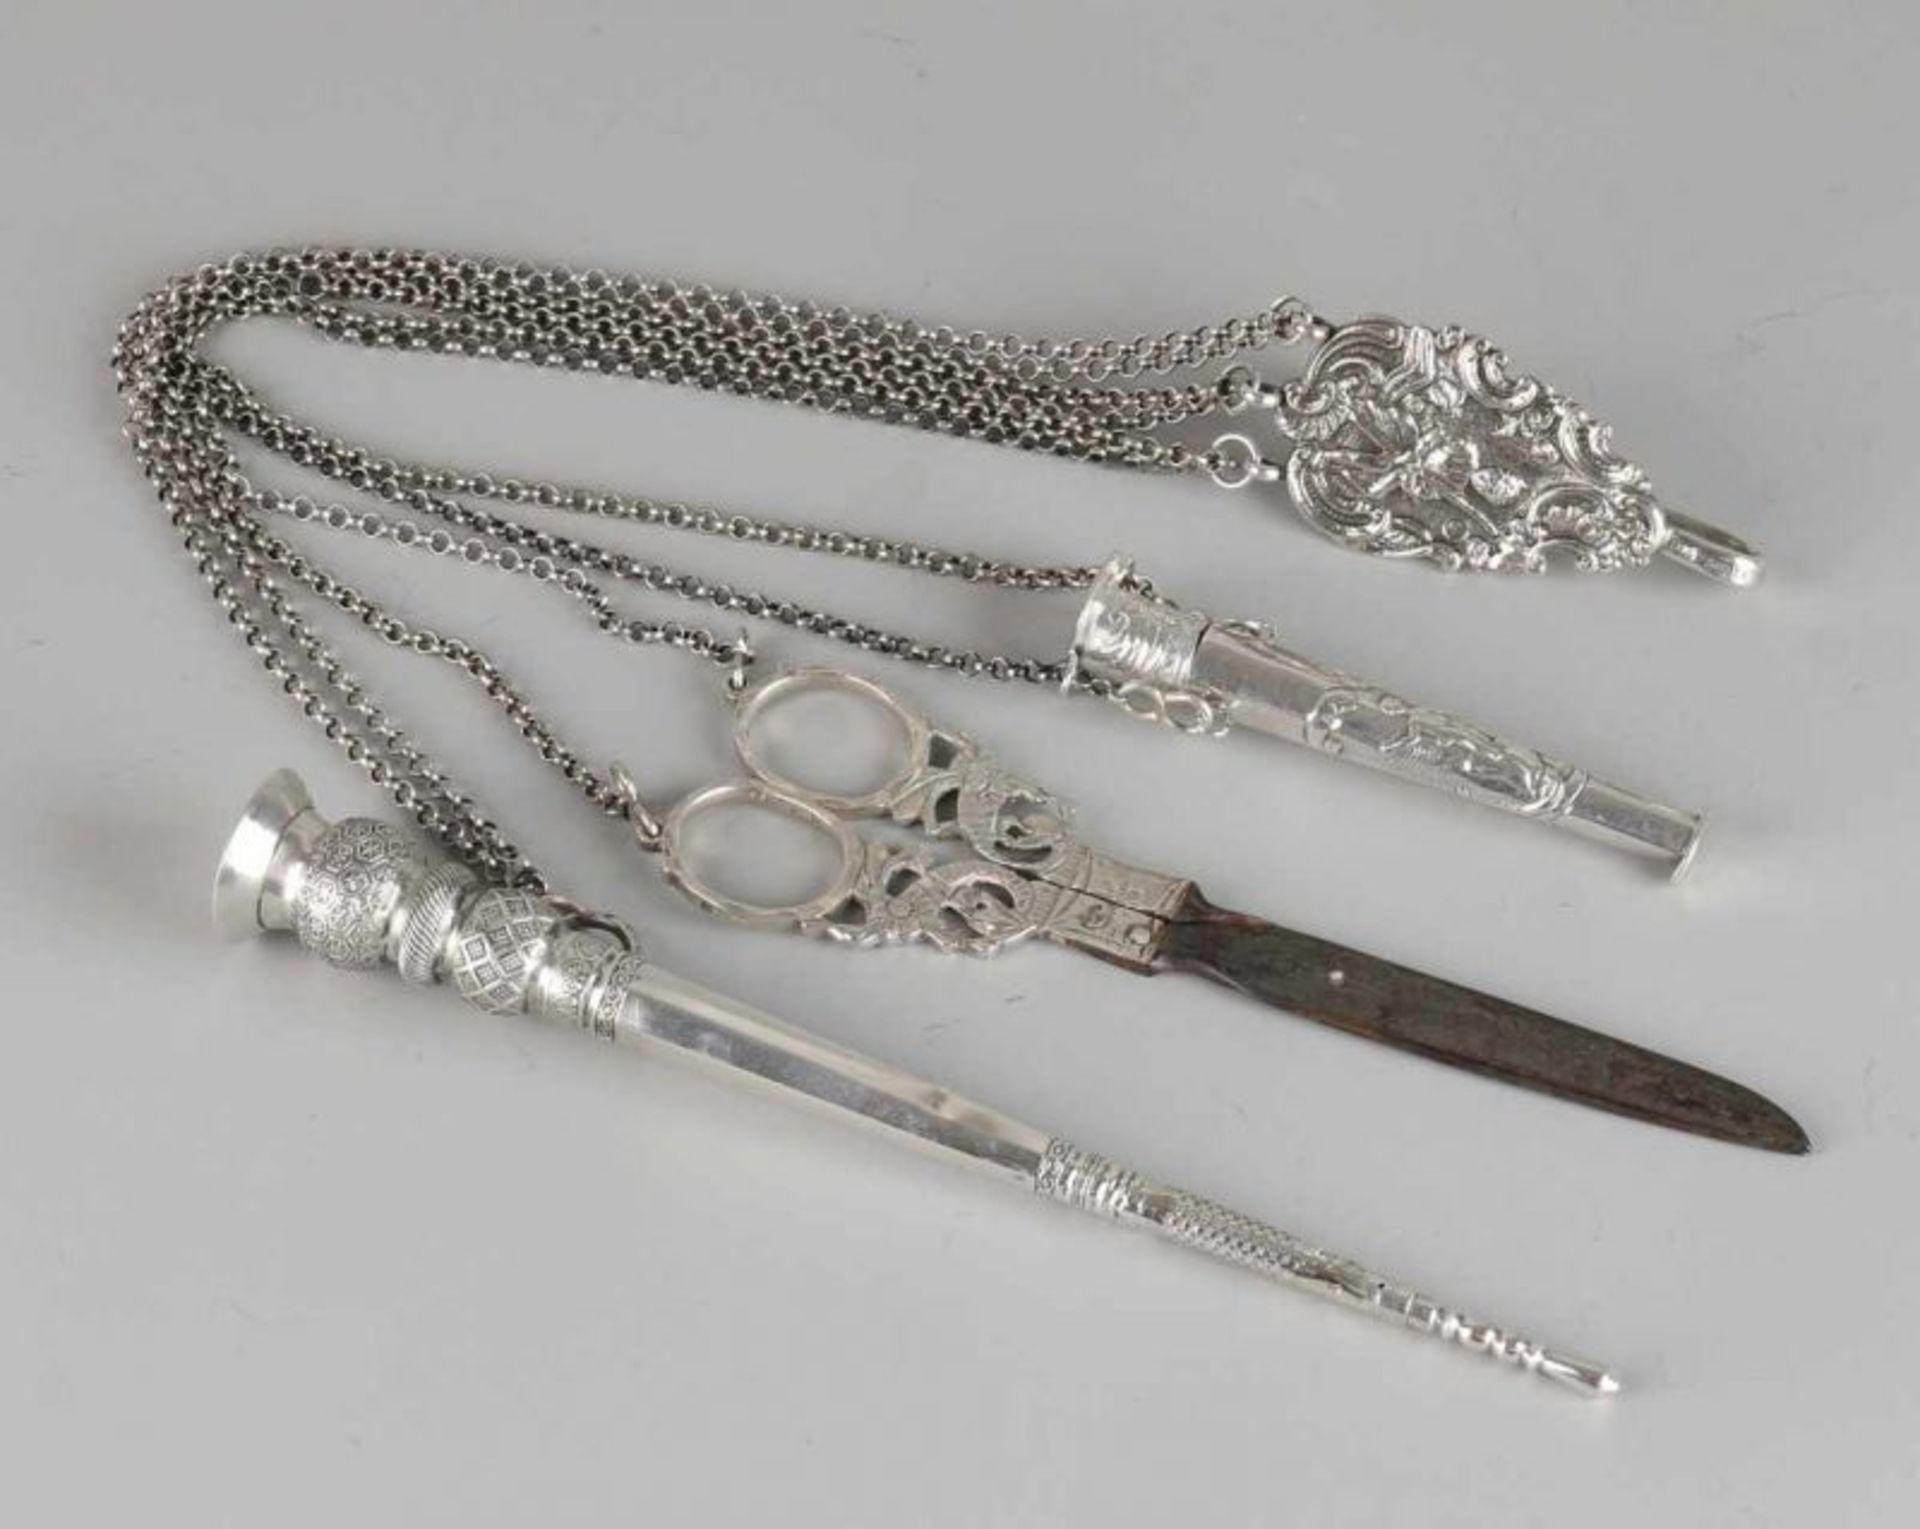 Silver chatelaine with rokhaak, scissors, needle case and breipenschede, 833/000. Pear-shaped